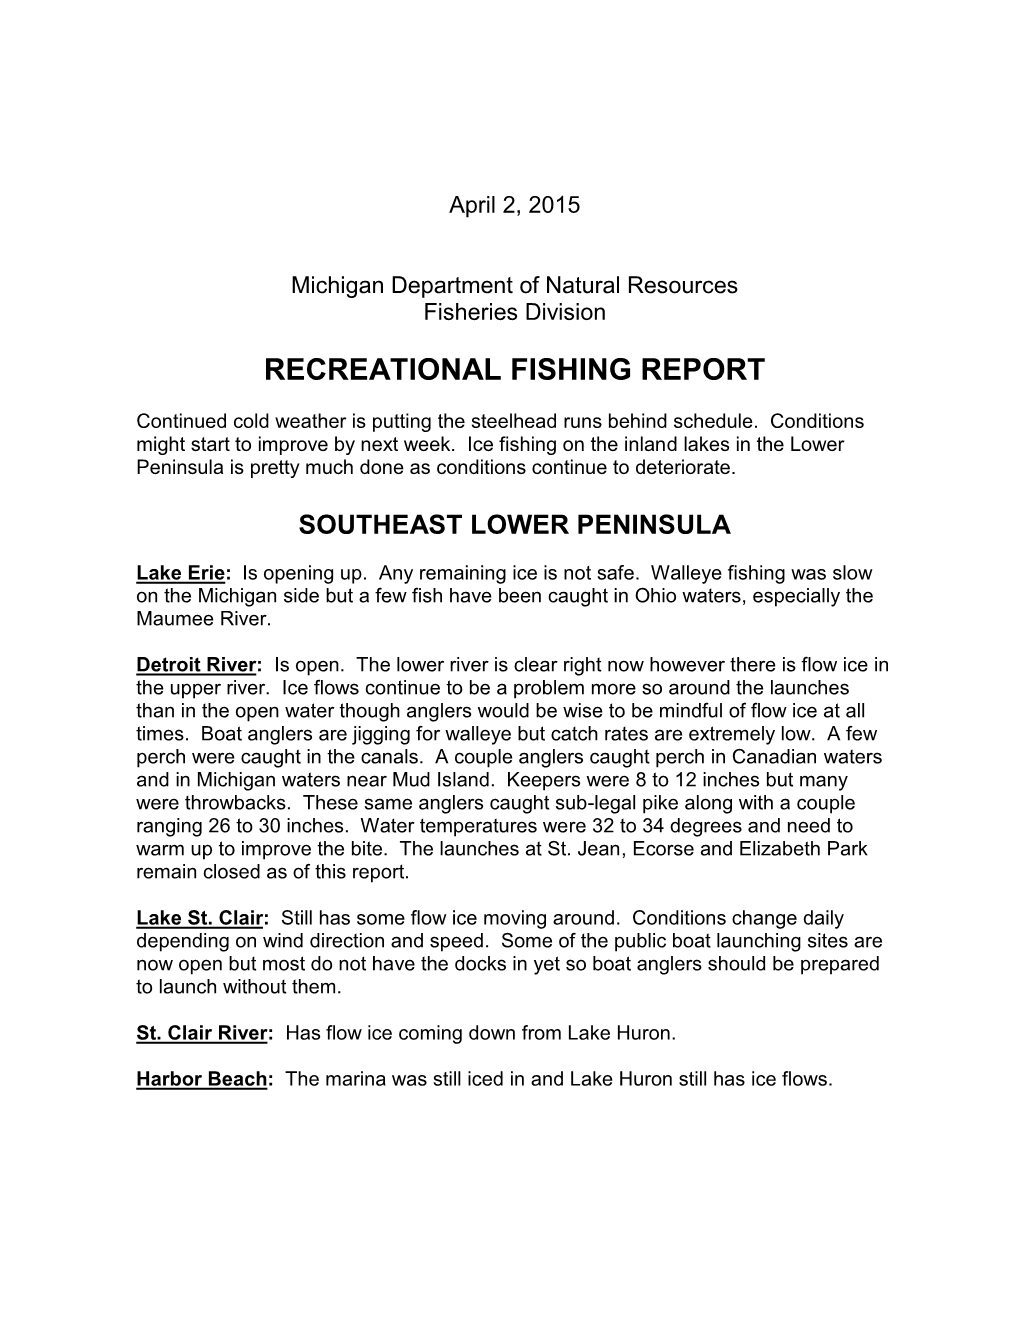 2015 MI Fishing Reports for April, May and June